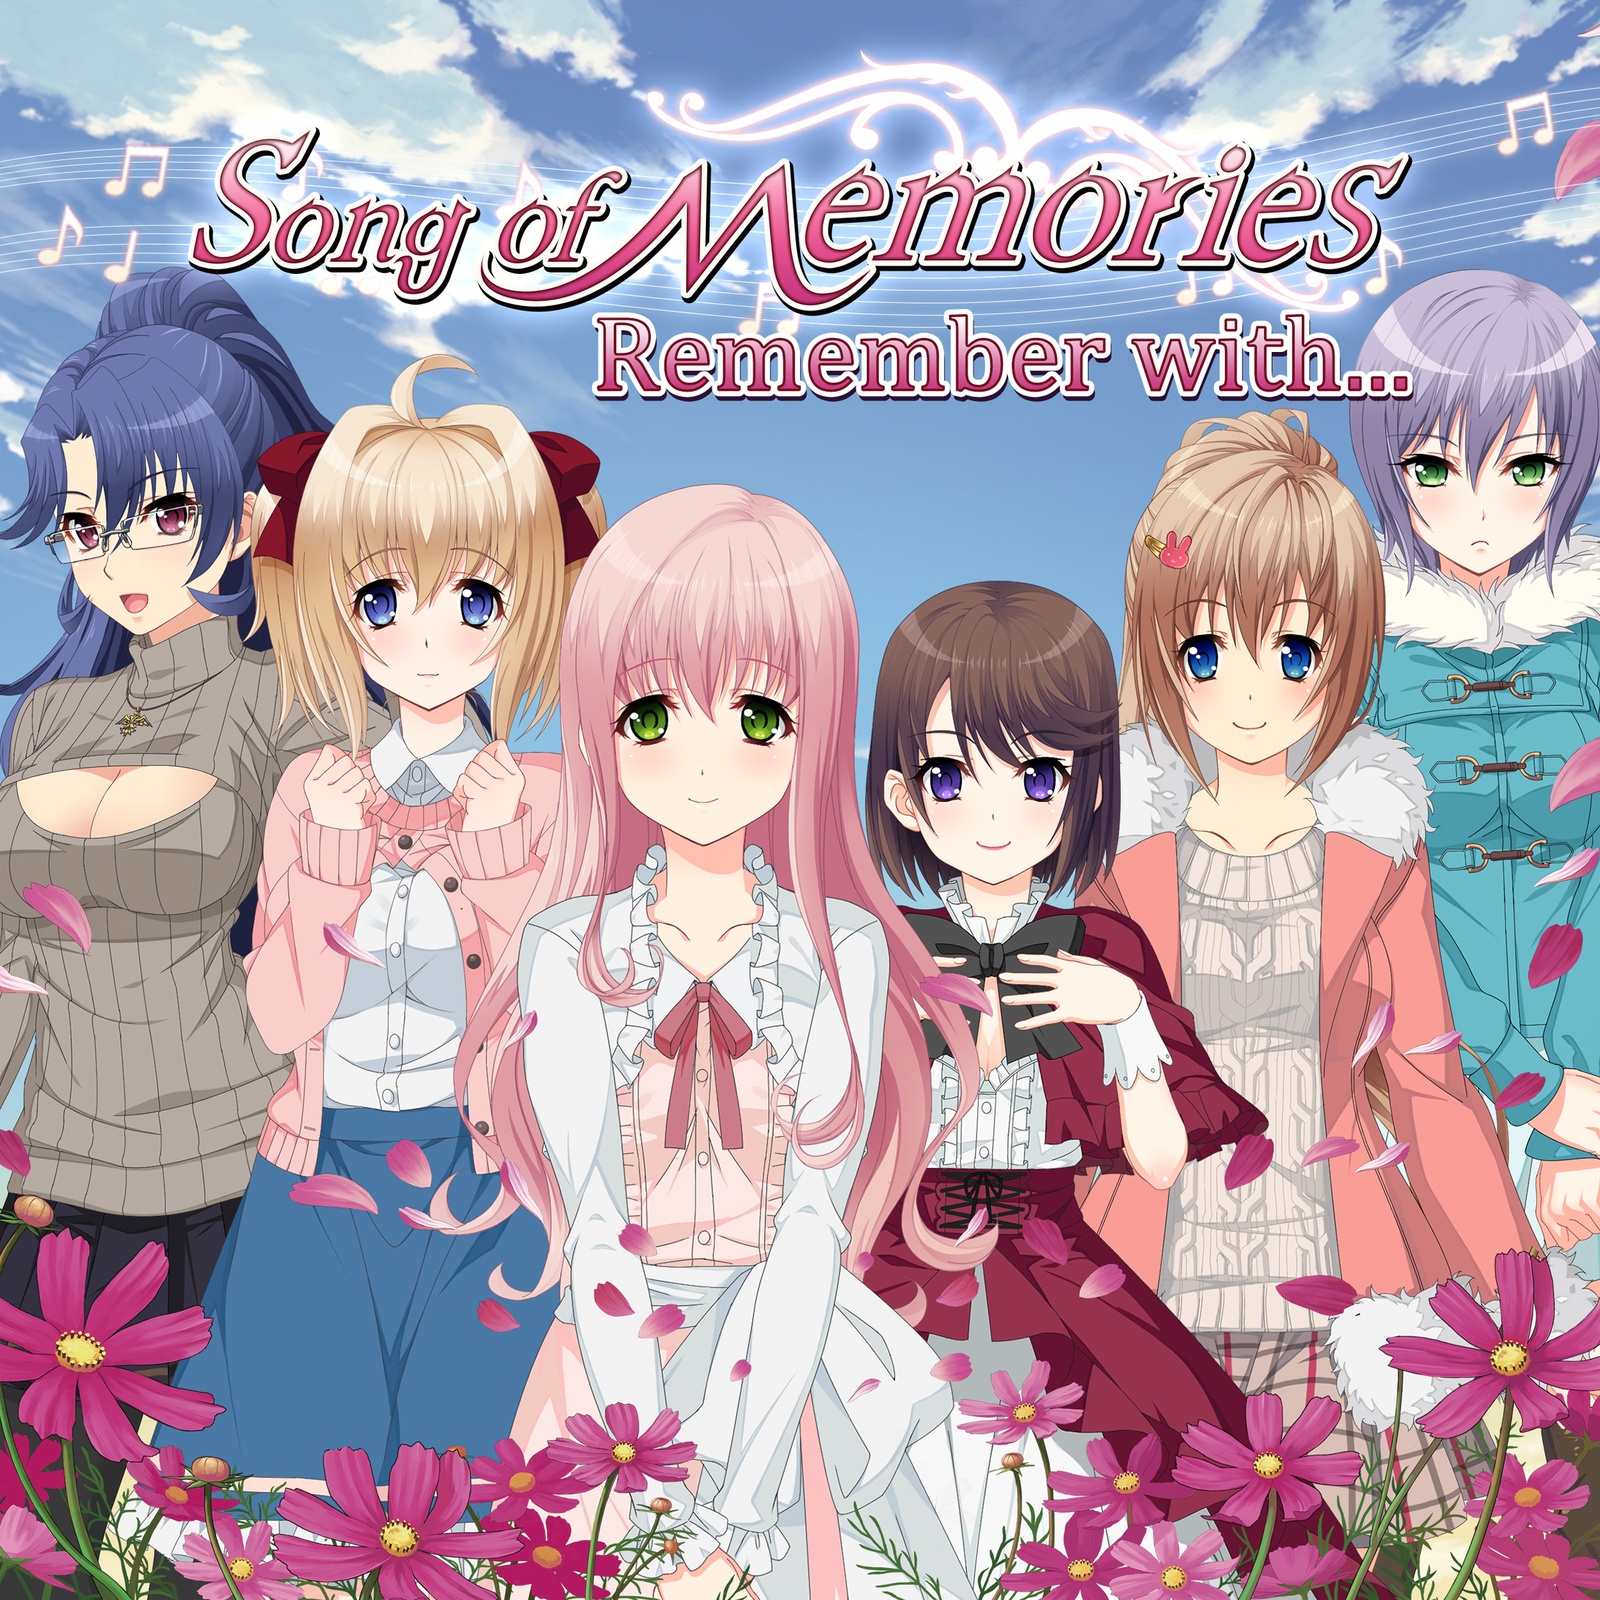 Song of Memories Remember with...